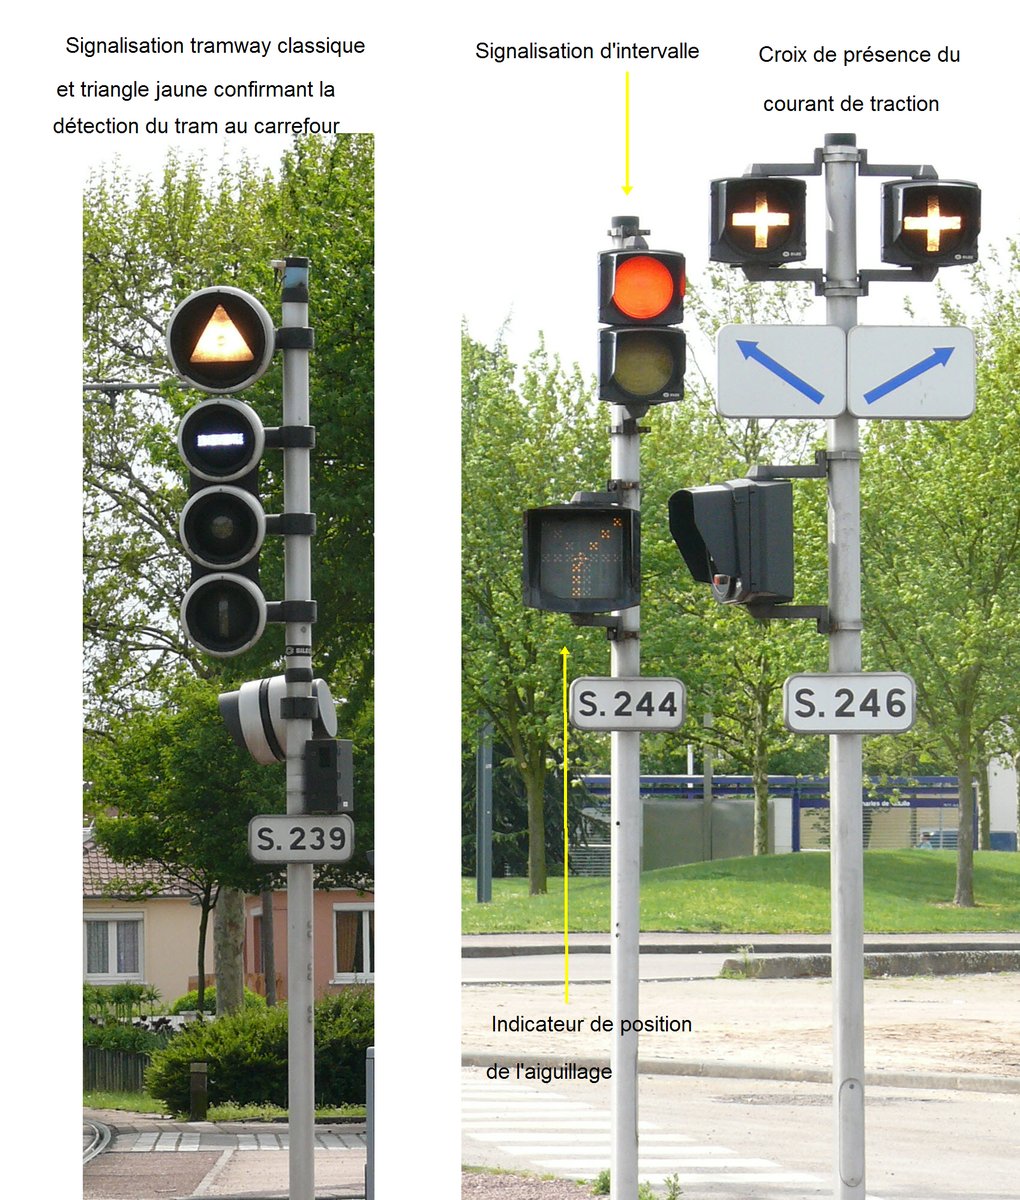 10/ Another fundamental component defining M-E-T is traffic light priority and remote management from a centralized control center